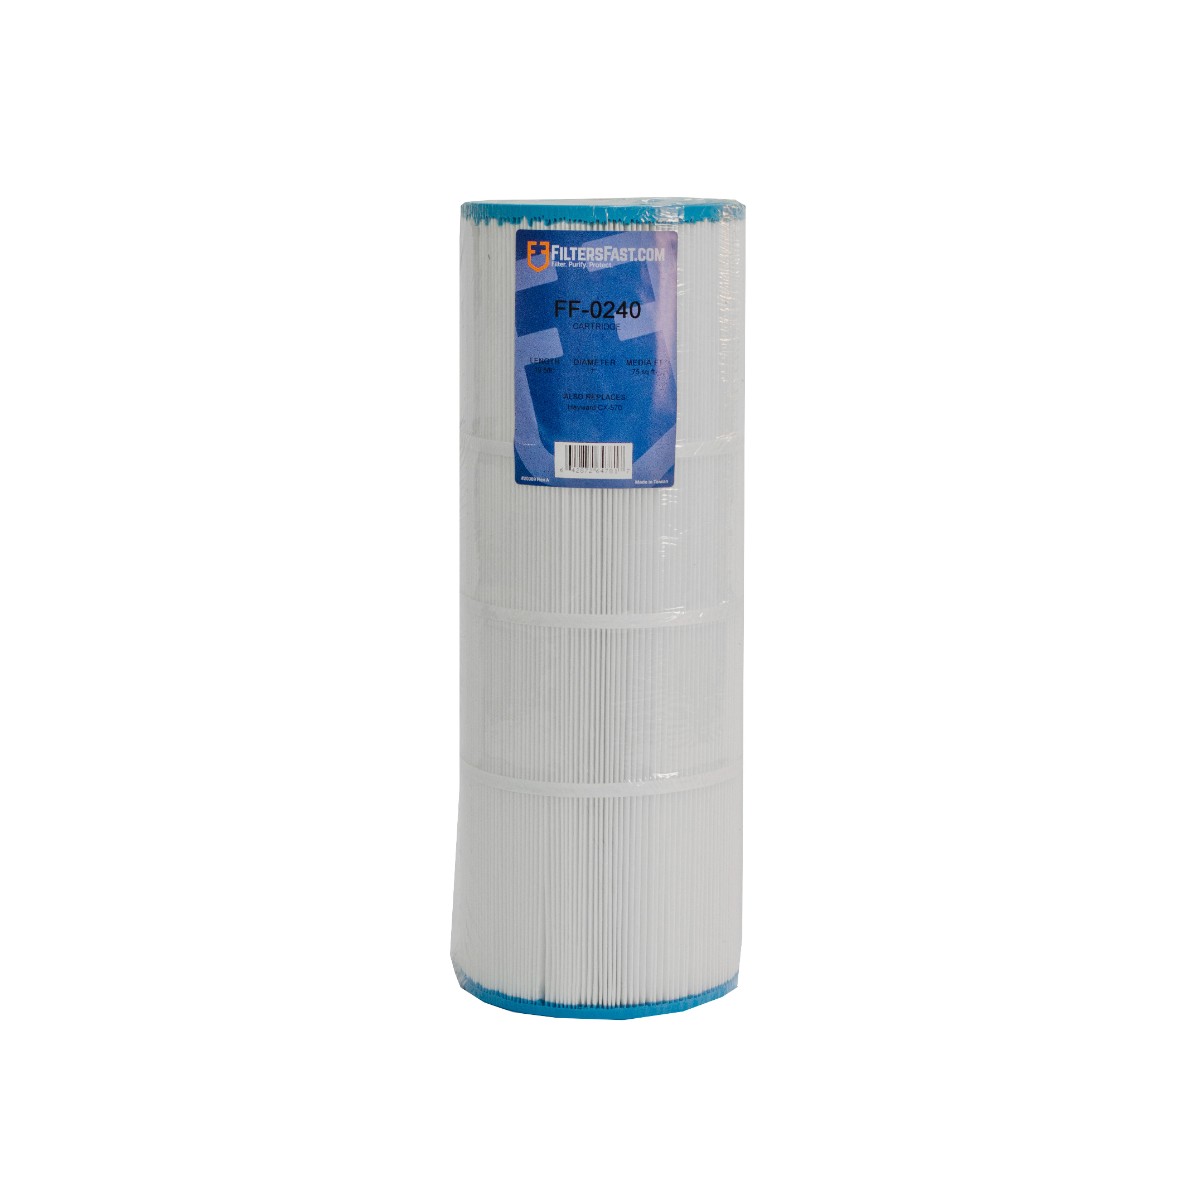 Filters Fast&reg; FF-0240 Replacement Pool & Spa Filter Cartridge